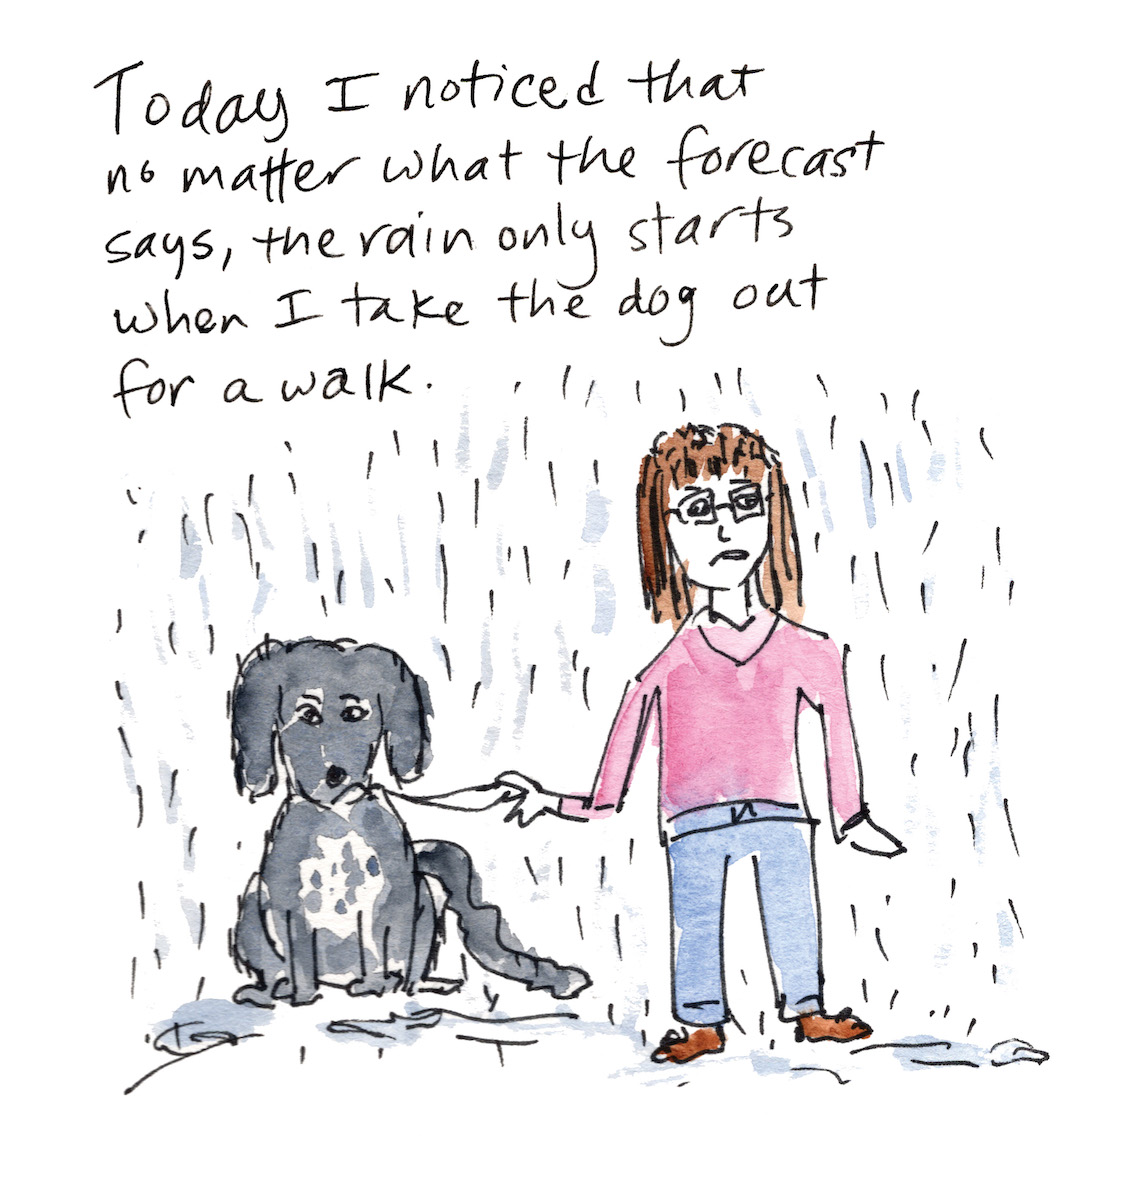 Today I noticed that no matter what the forecast says, the rain only starts when I take the dog out for a walk.